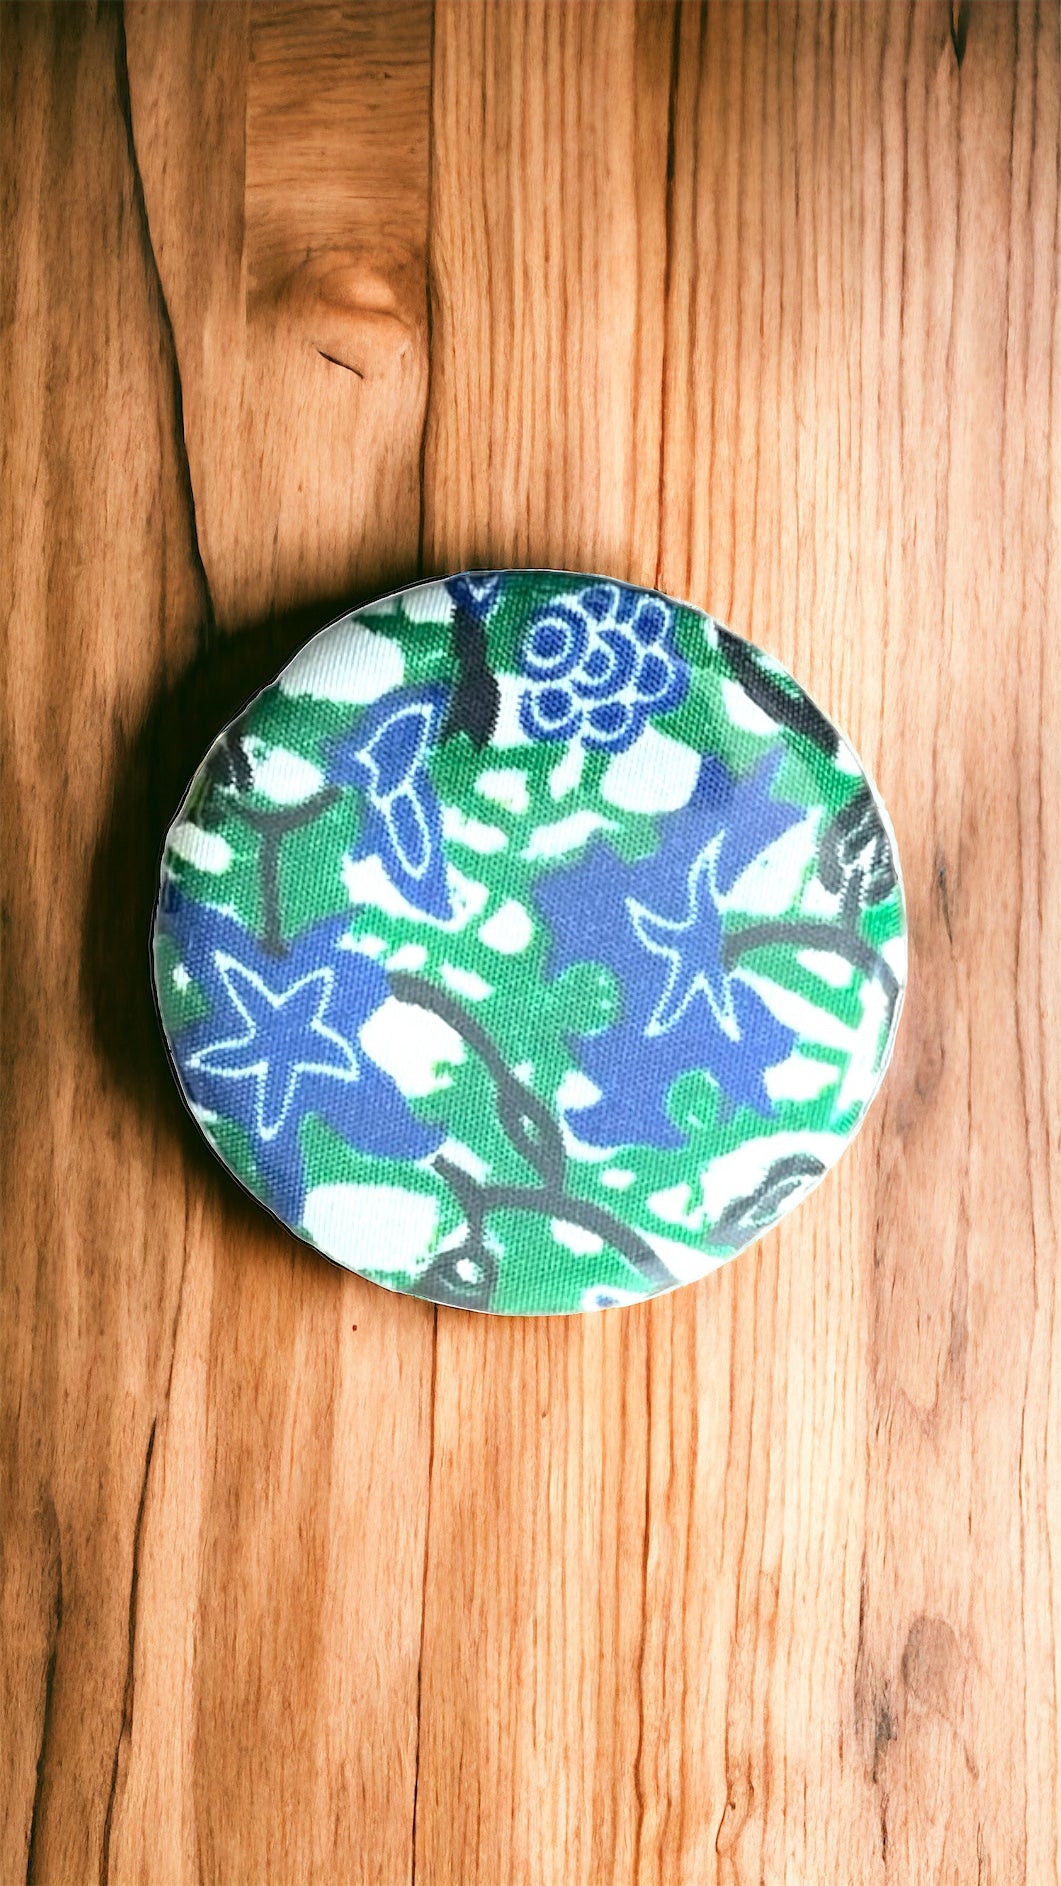 Afro Badges/Pin-Back Buttons